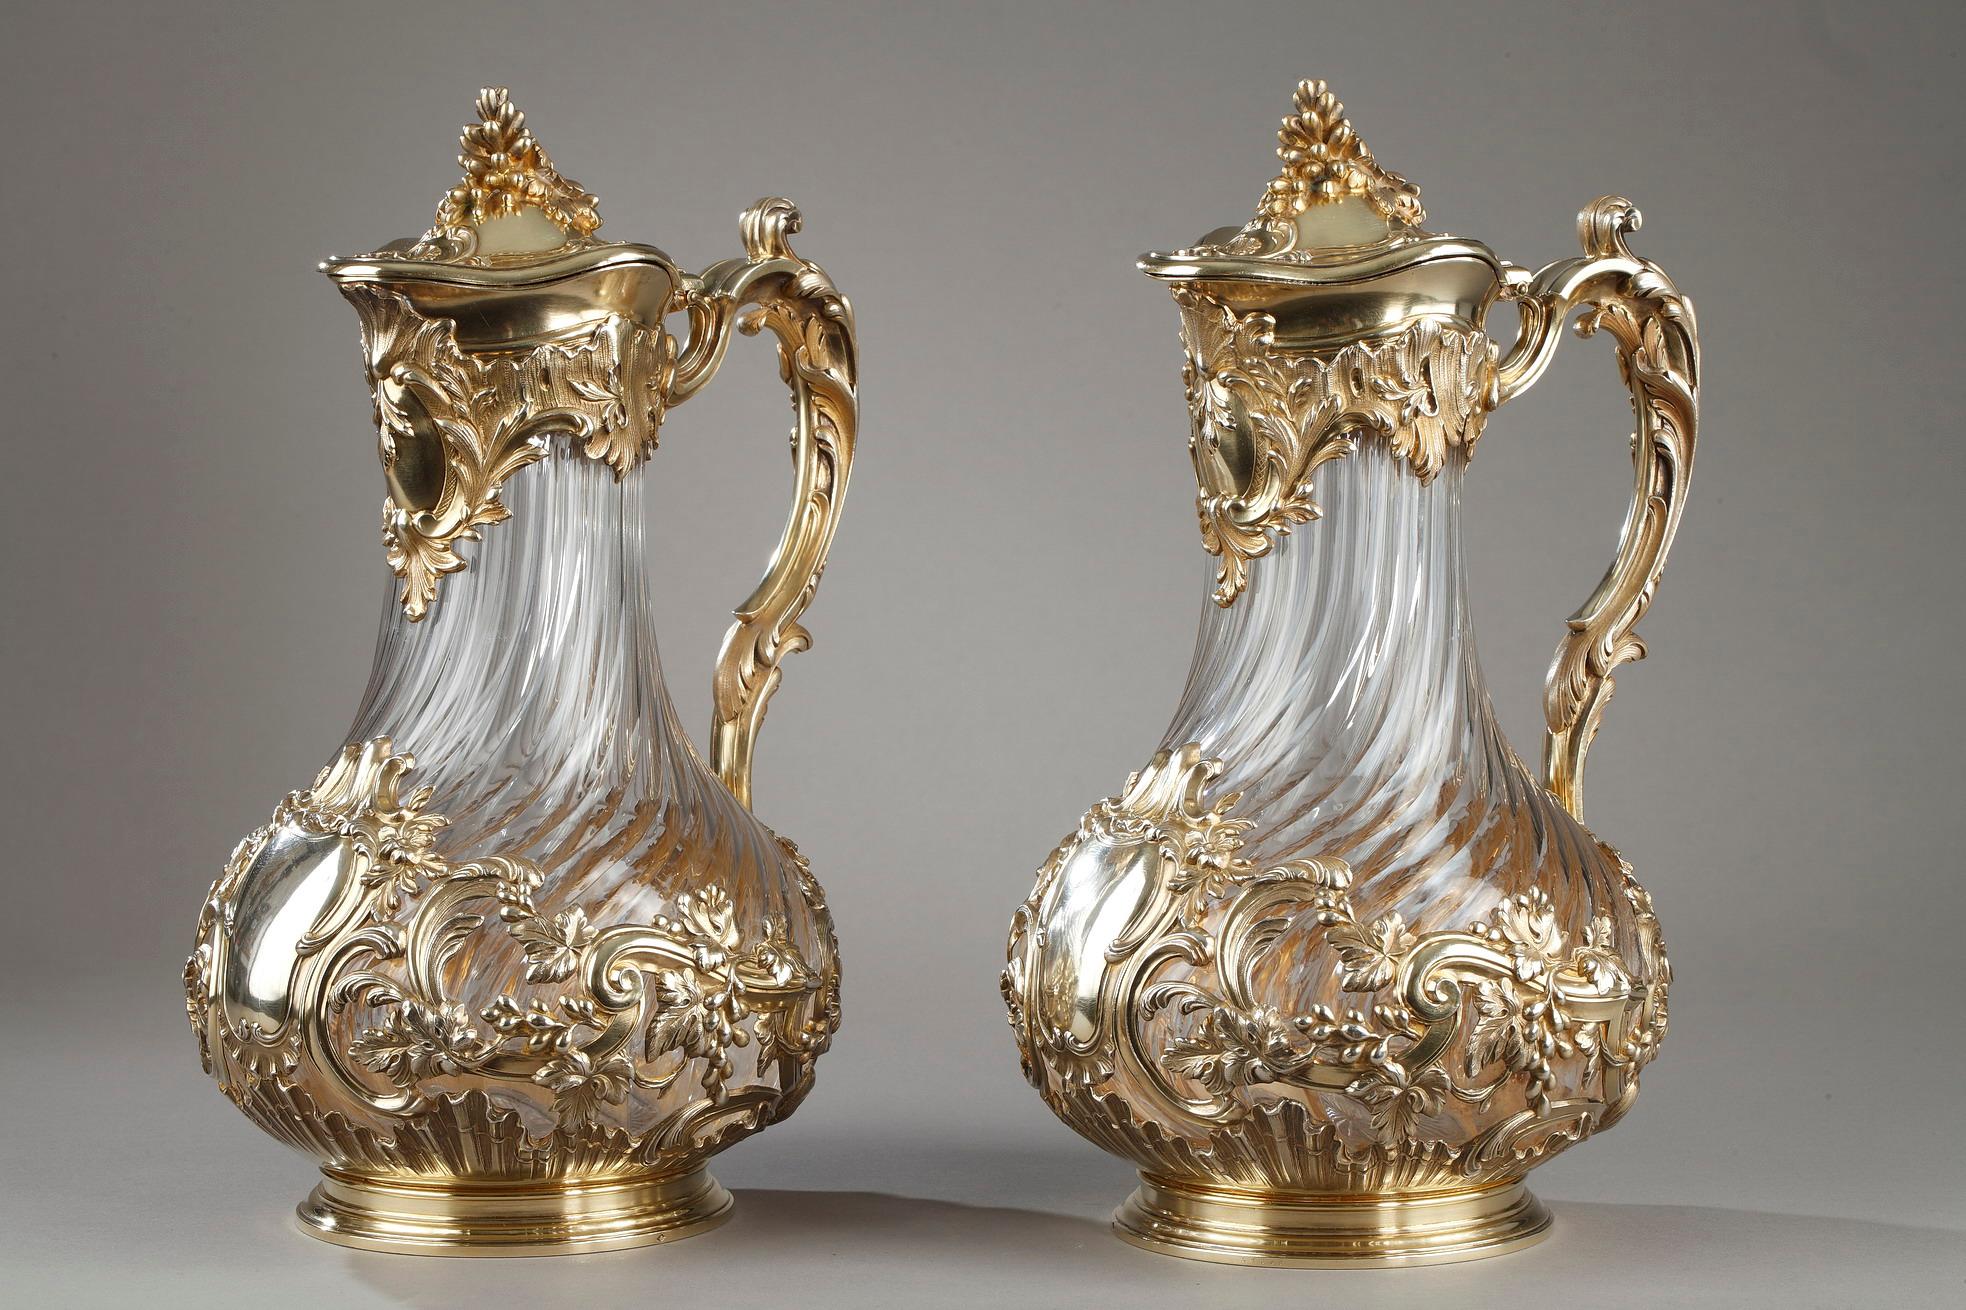 Important pair of carafes or jugs in orangeade in blown crystal, cut and twisted. The crystal is set in a silver and vermeil setting. The collar includes a cartouche decor, asymmetrical rocky patterns. The grip in high relief is adorned with a